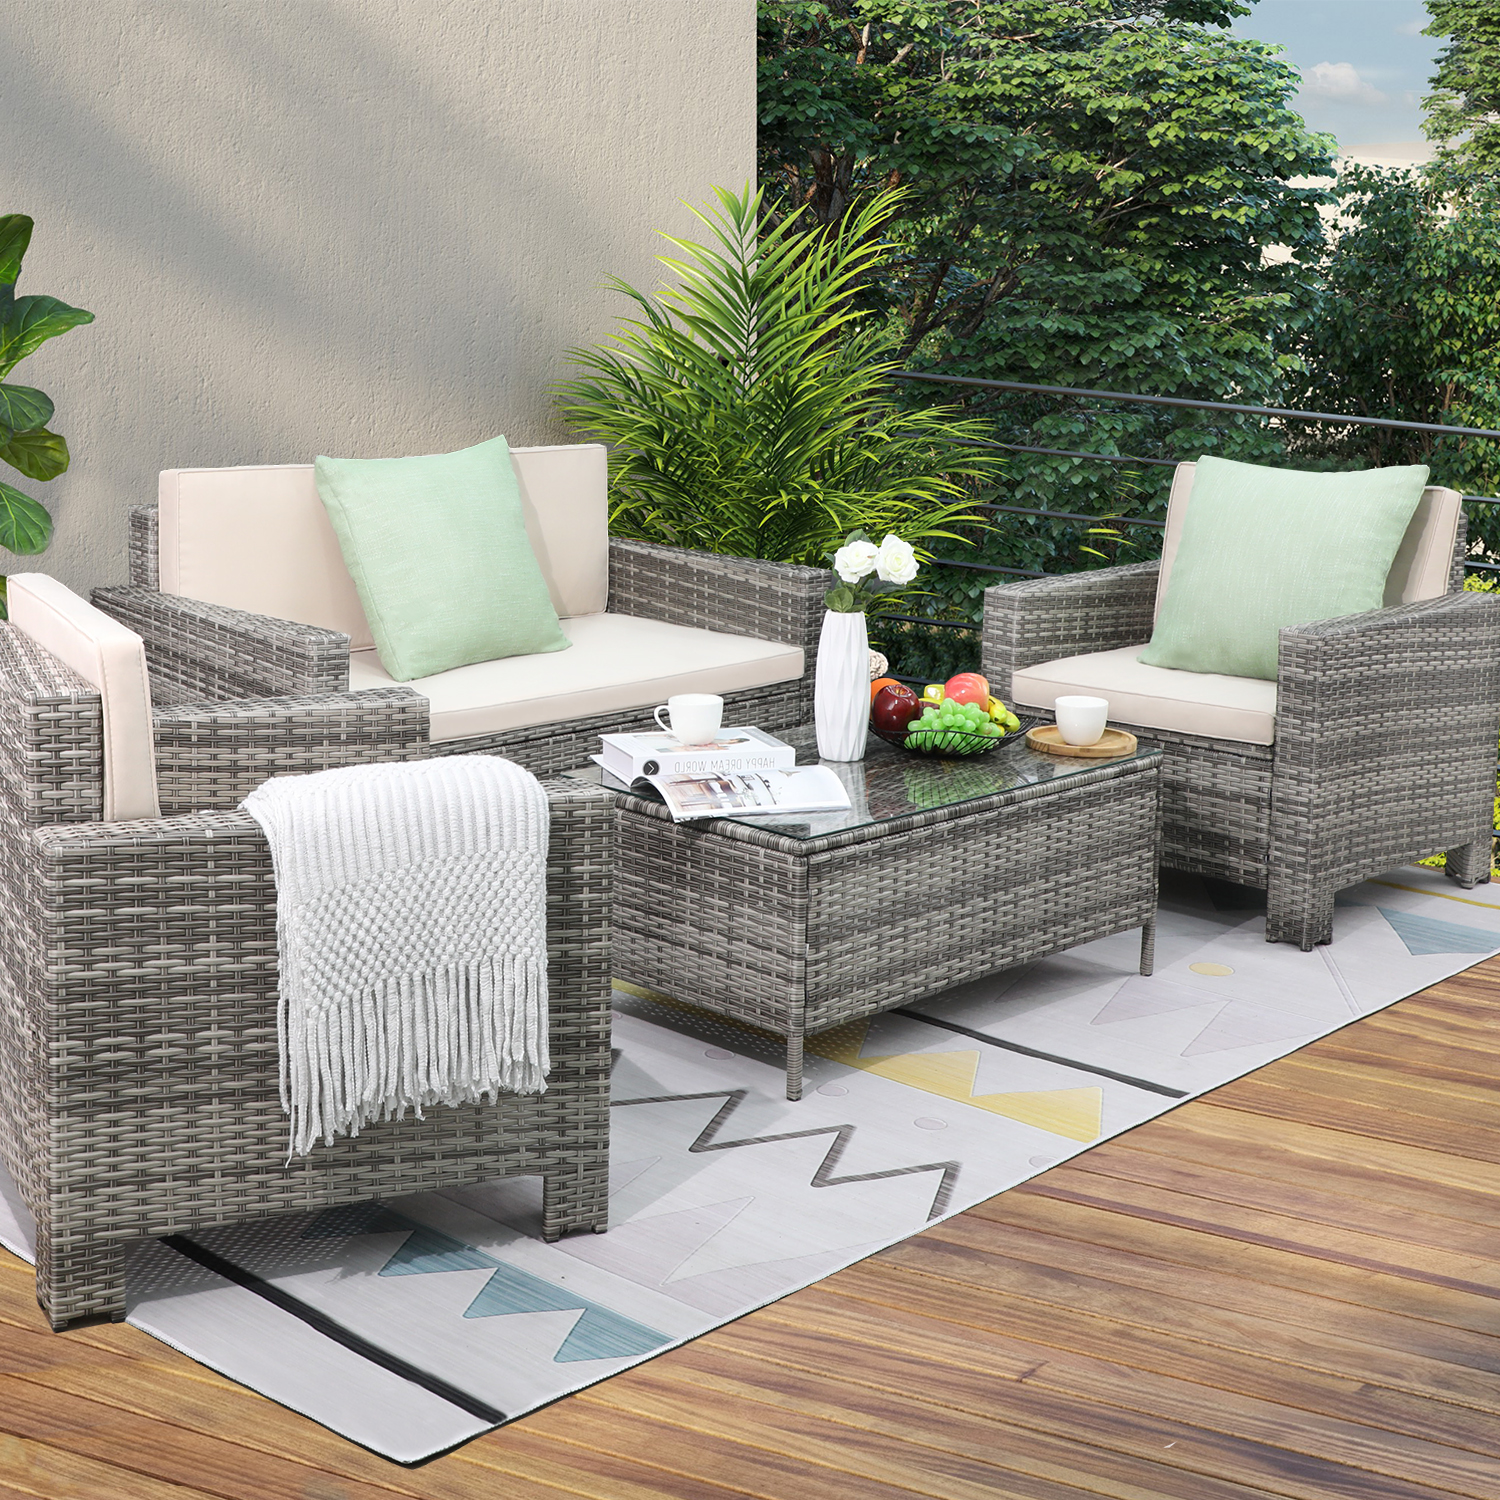 LACOO 4-Piece Grey Wicker Outdoor Patio Conversation Set with Beige Cushions - image 1 of 4